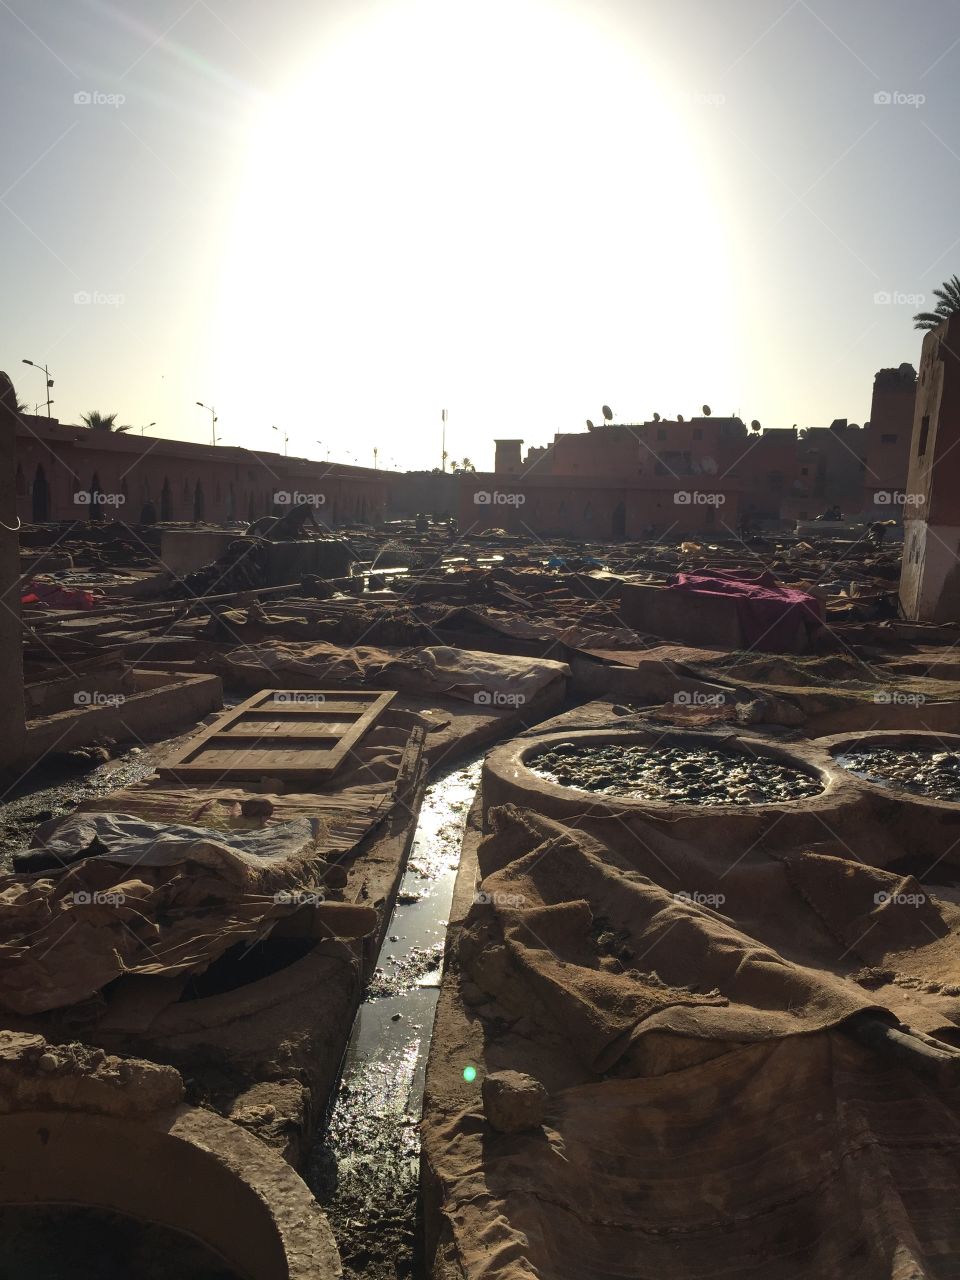 Leather works in Marrakech